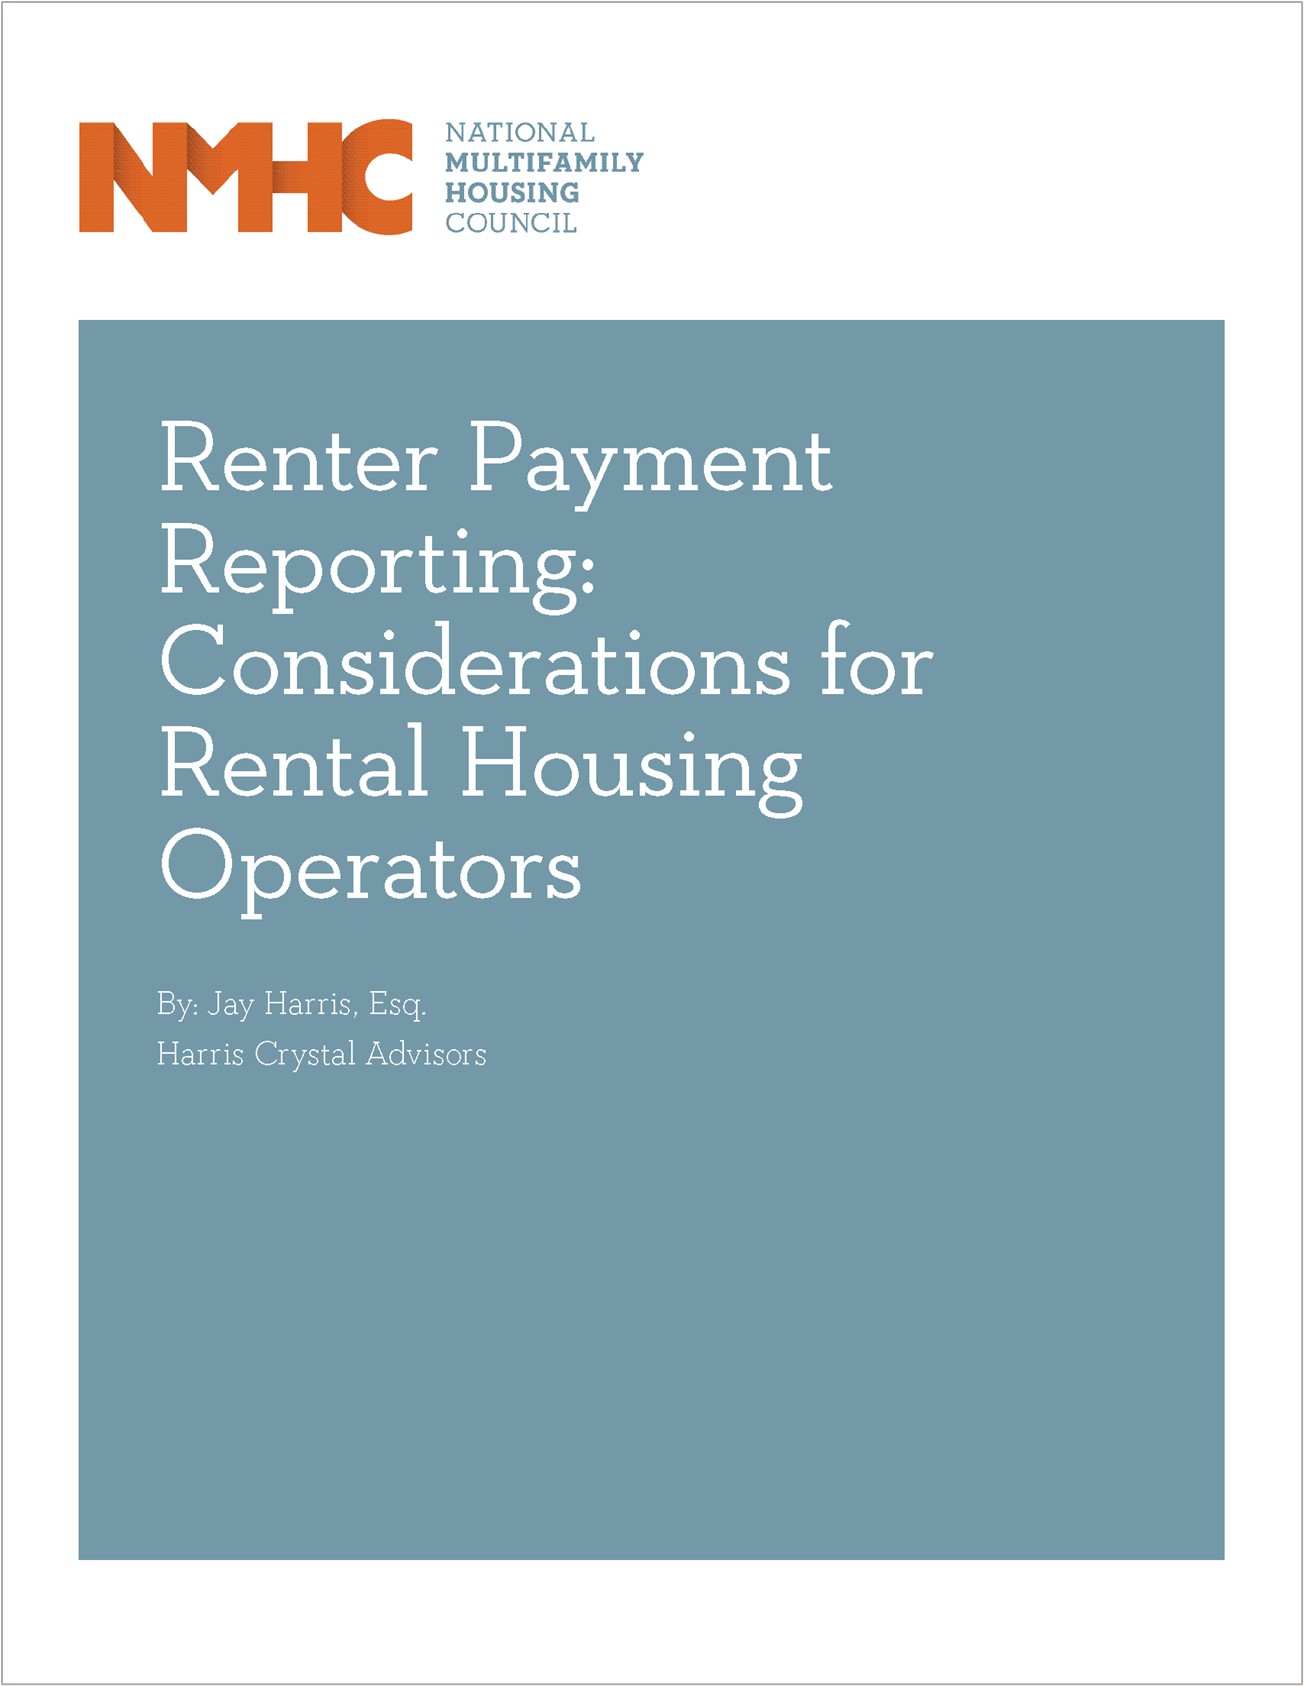 Renter Payment Reporting: Considerations for Rental Housing Operators